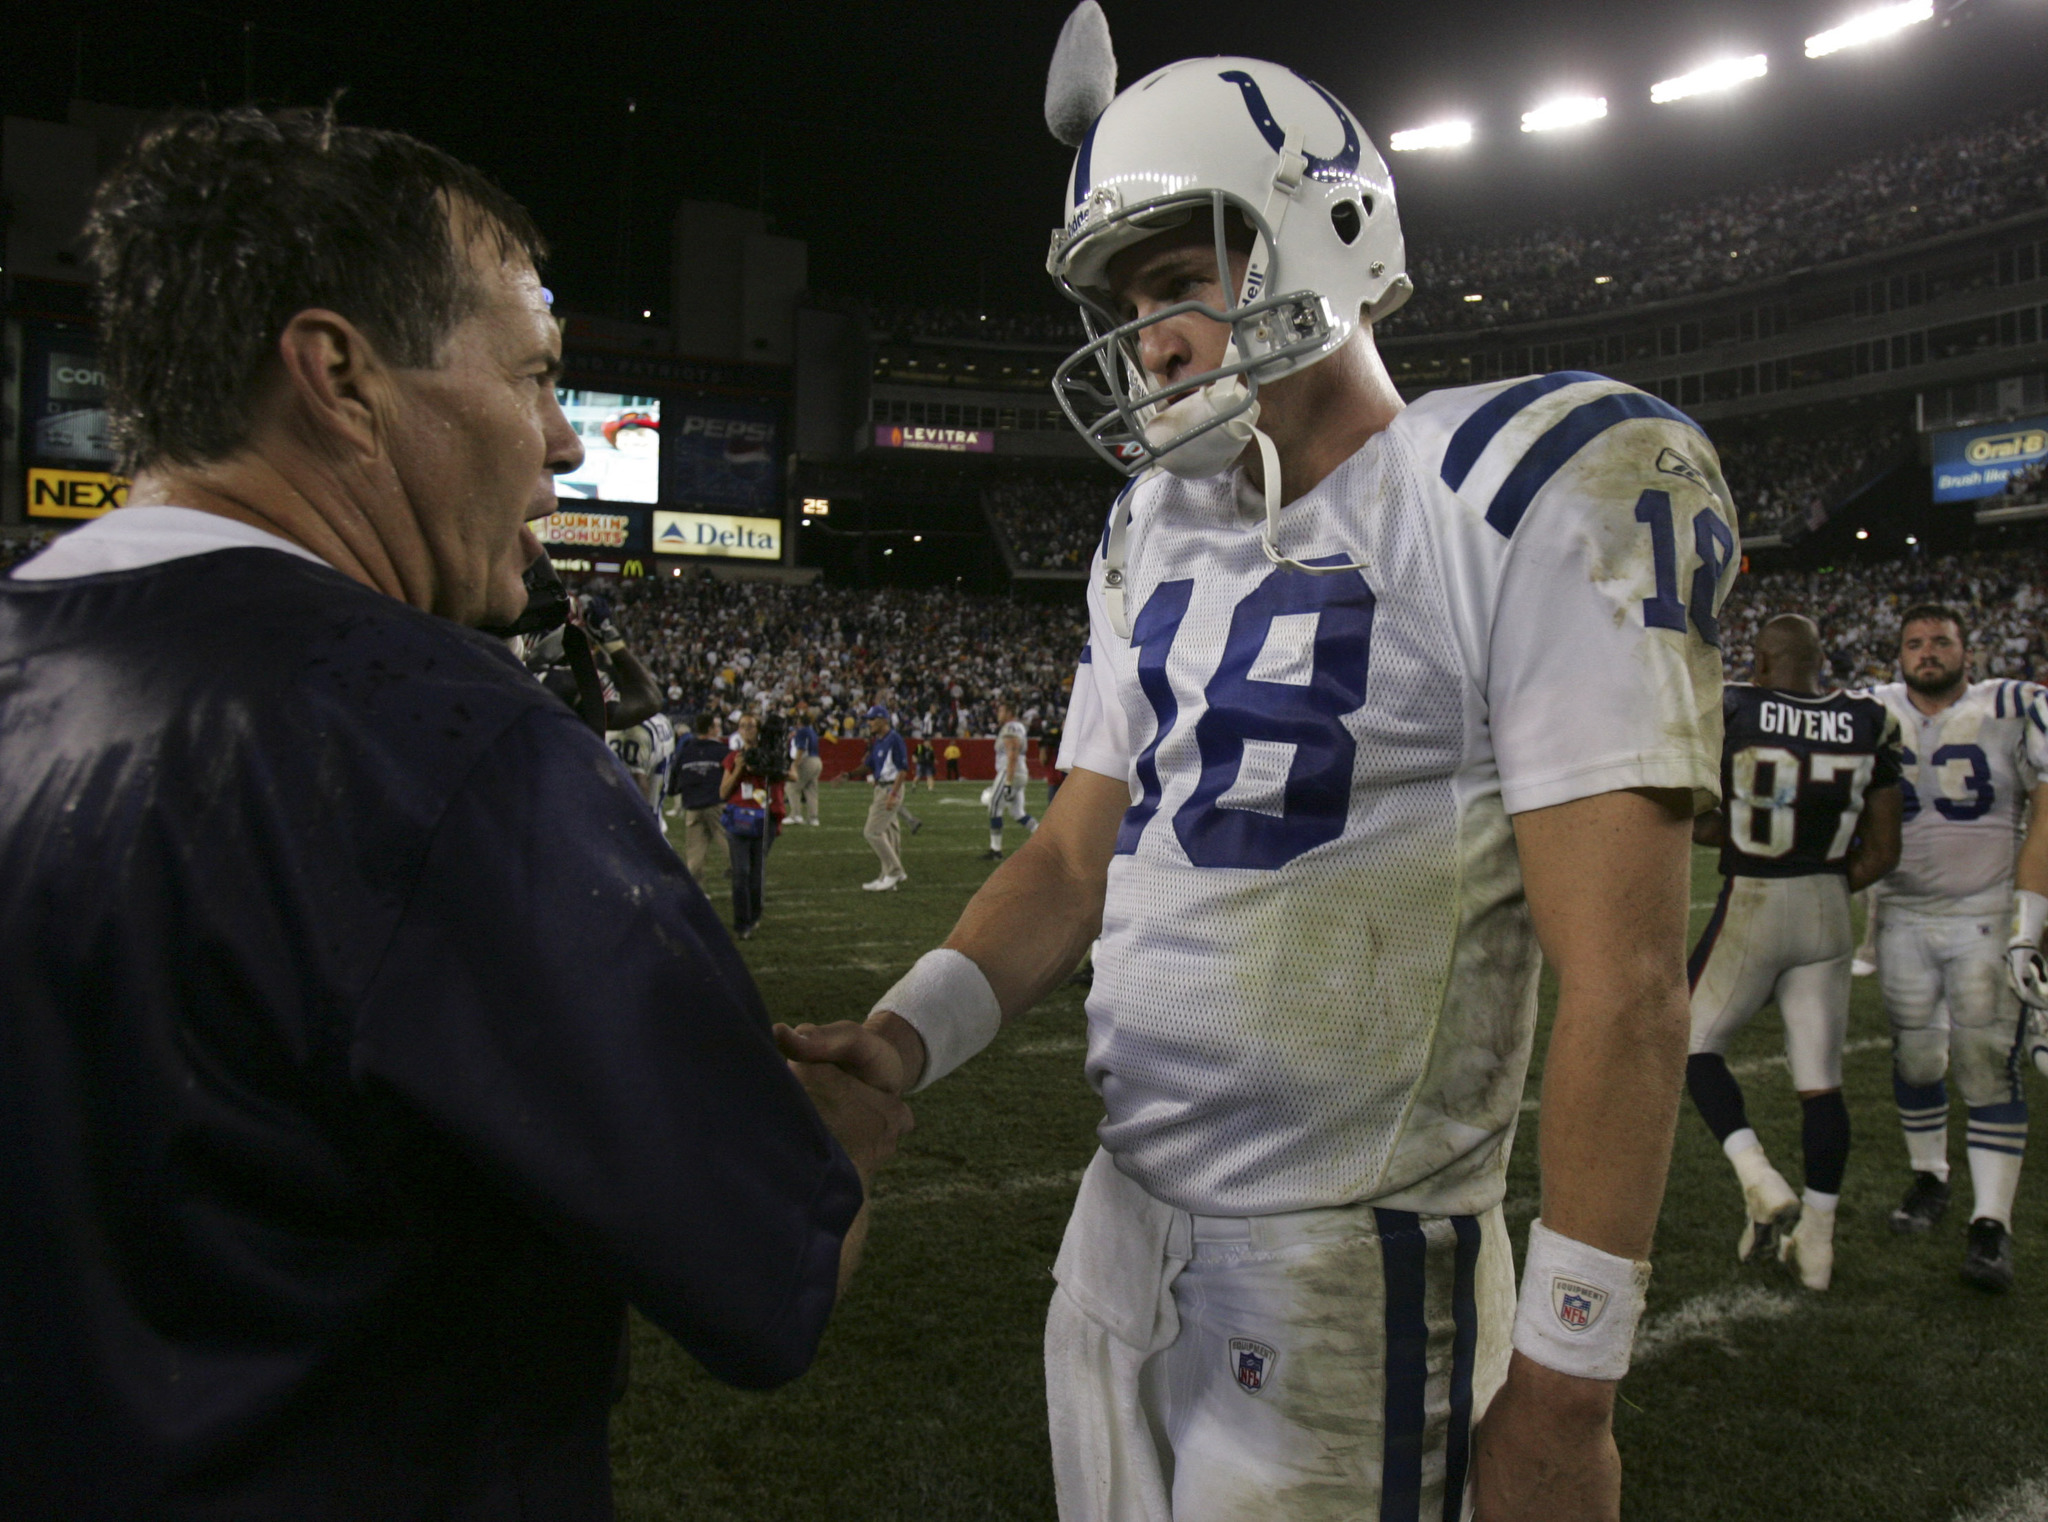 Peyton Manning and Belichick in 2004